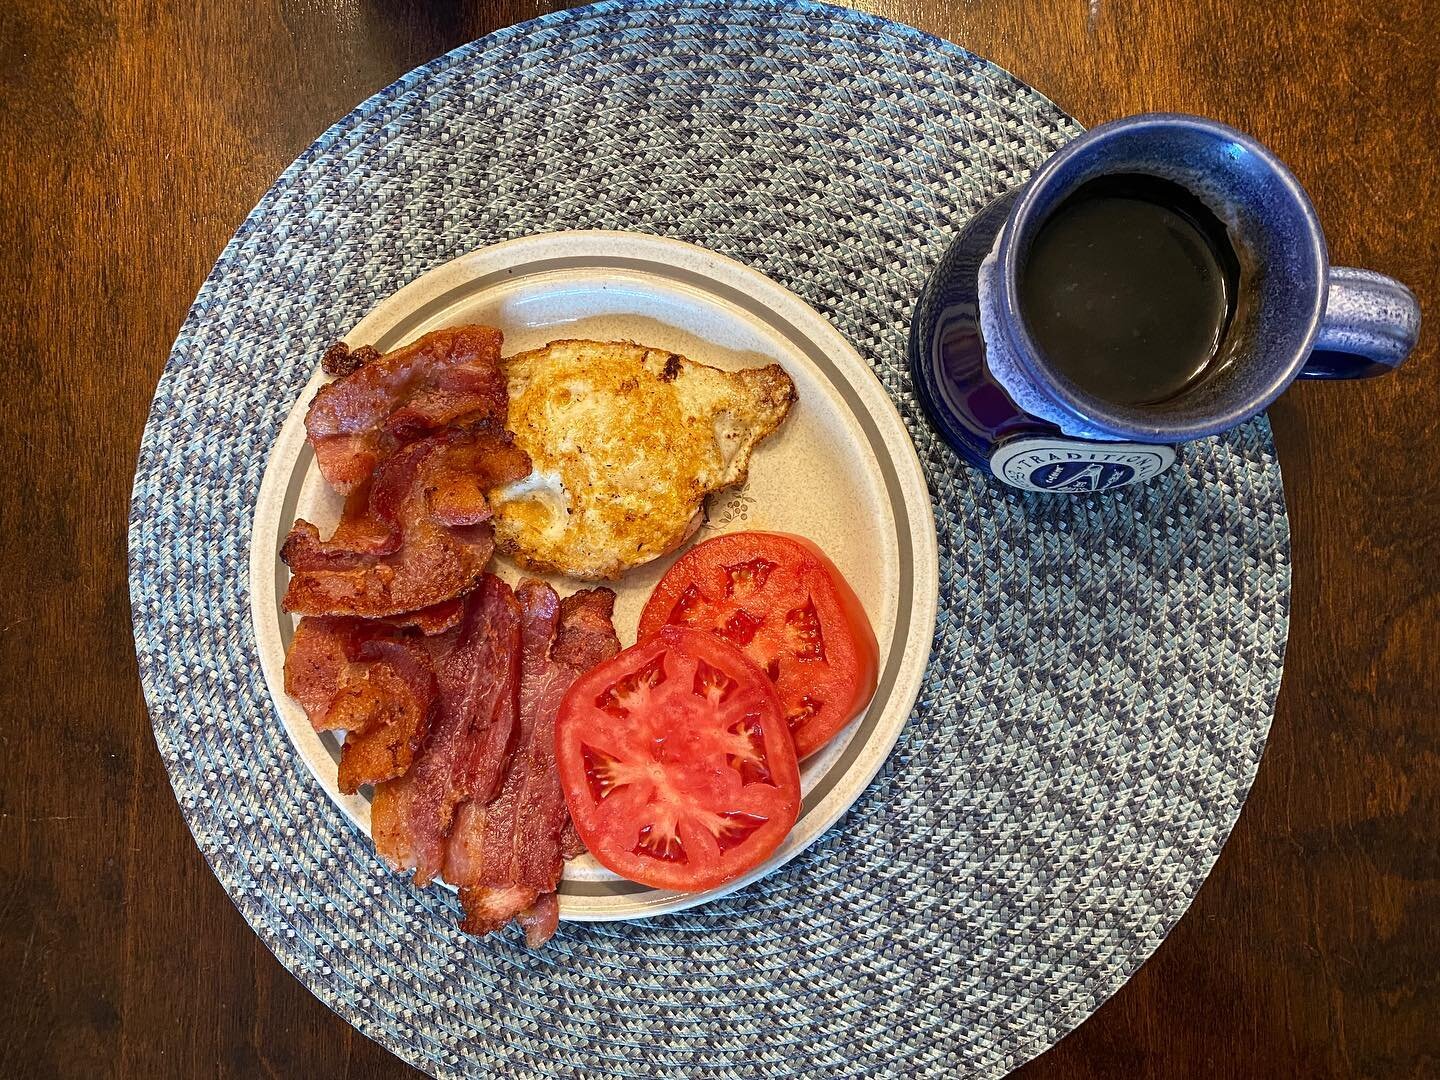 #hobbitday2022 
Second Breakfast: tomato, egg, and nice crispy bacon with more black coffee. 
#eatlikeahobbit 
#secondbreakfast